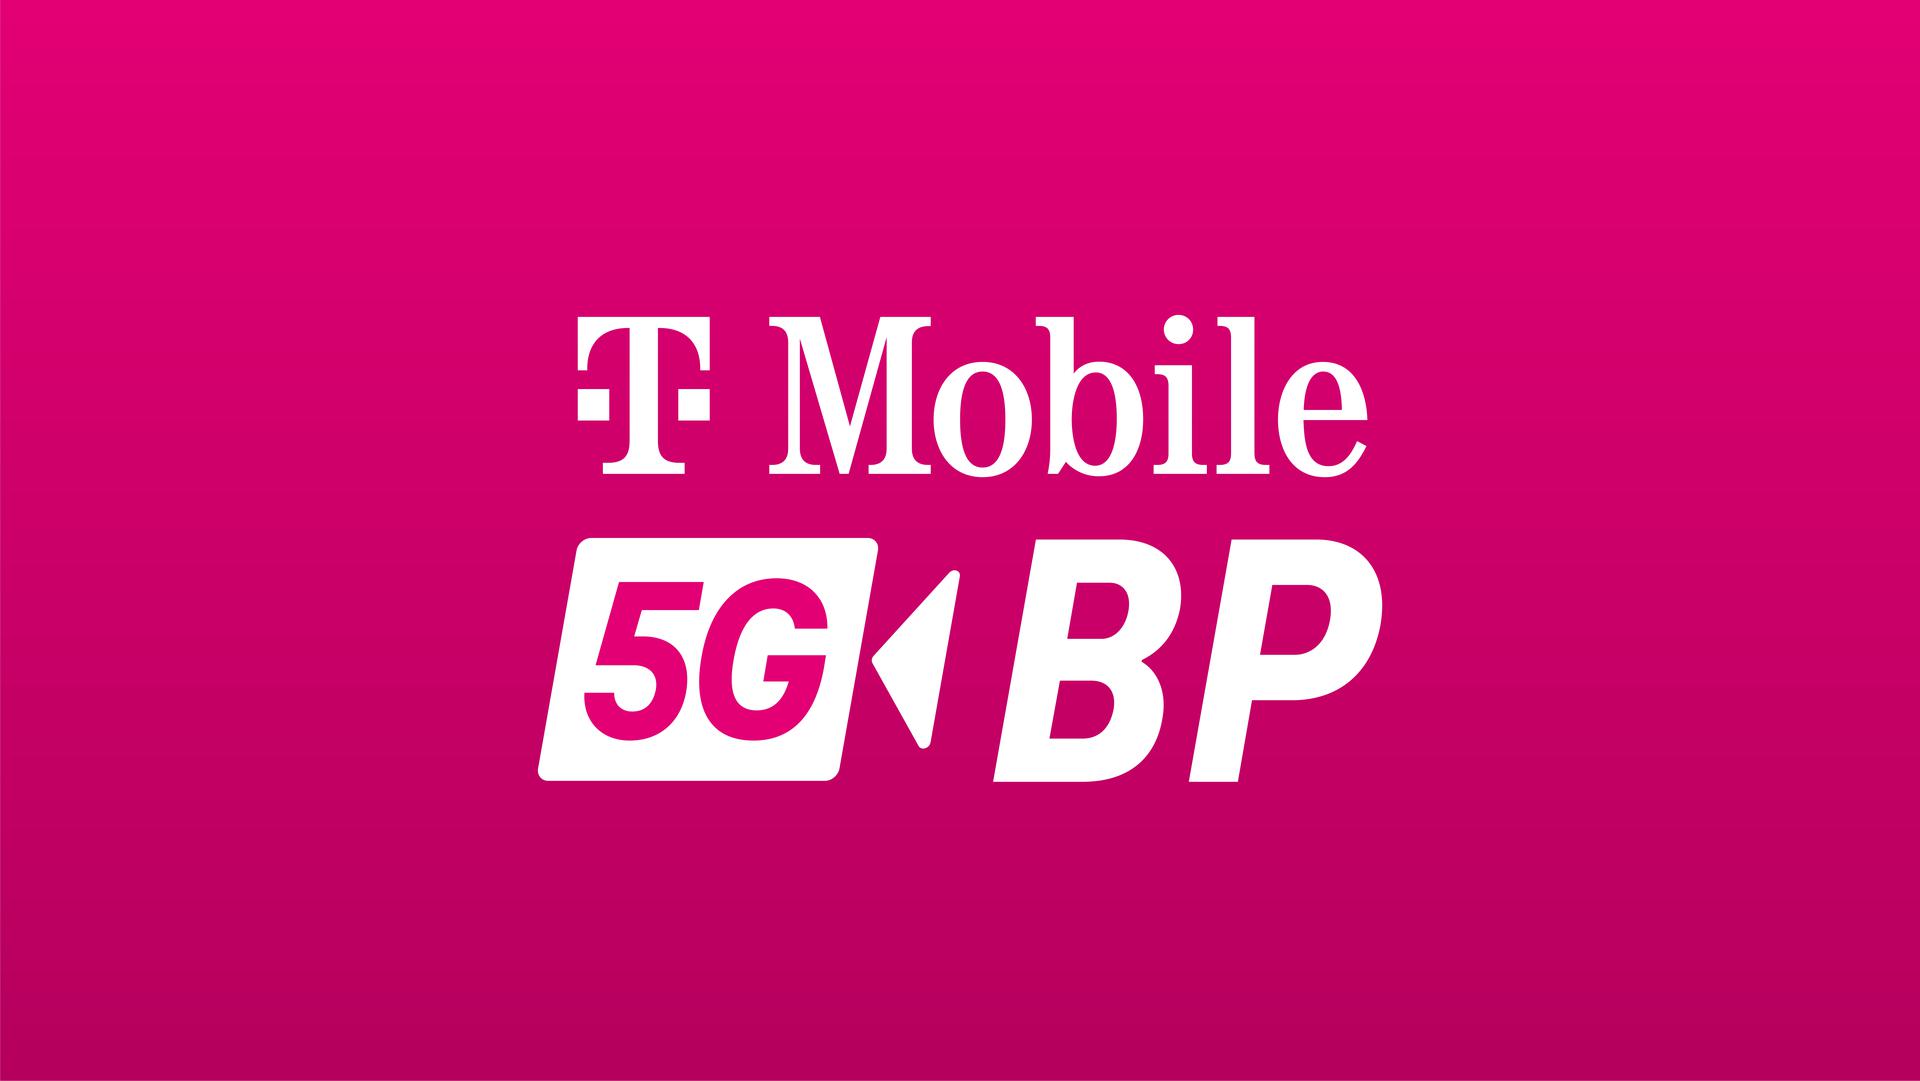 A bright pink background with the words ''T-Mobile 5G BP'' in white